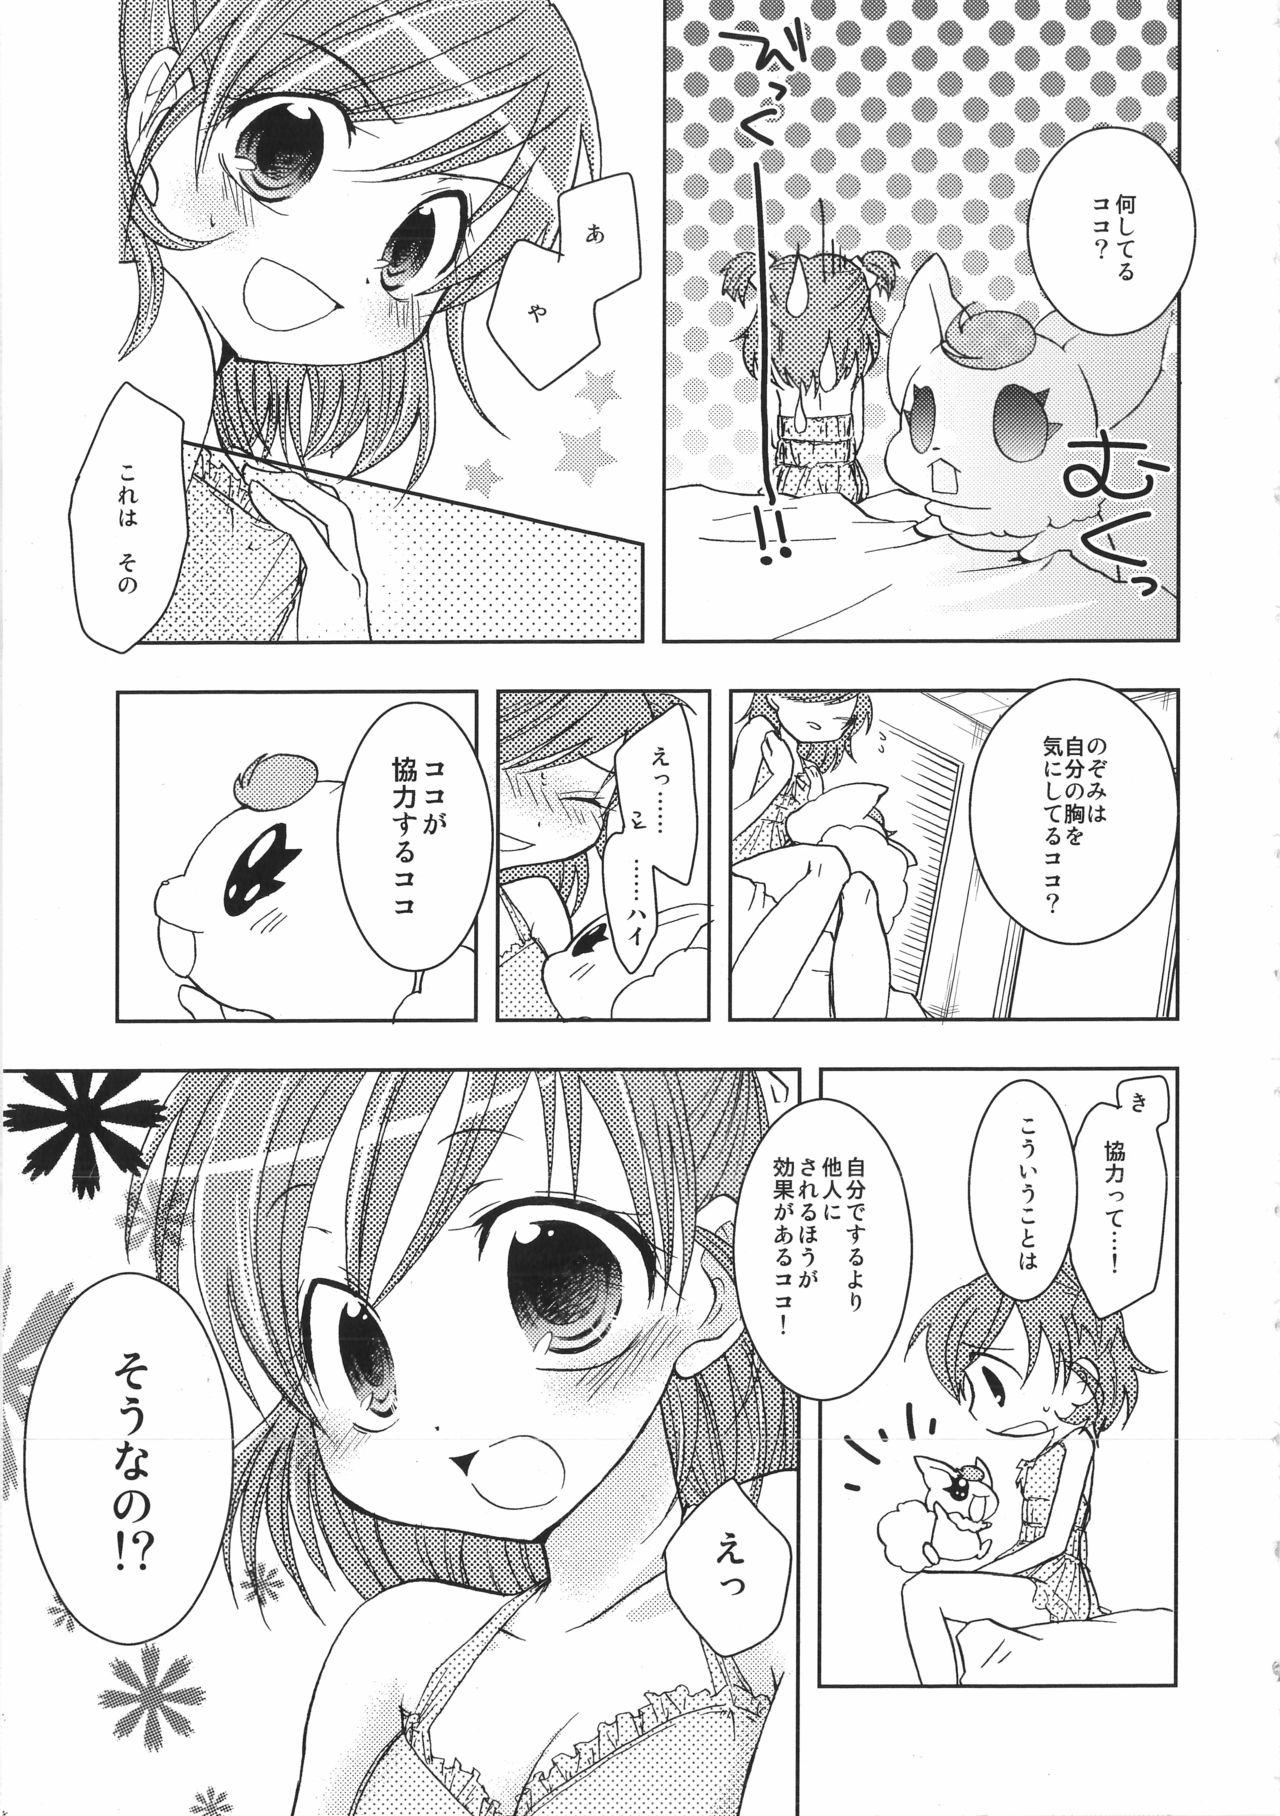 18yo Fruity Girl’s Hardship - Yes precure 5 Ball Busting - Page 6